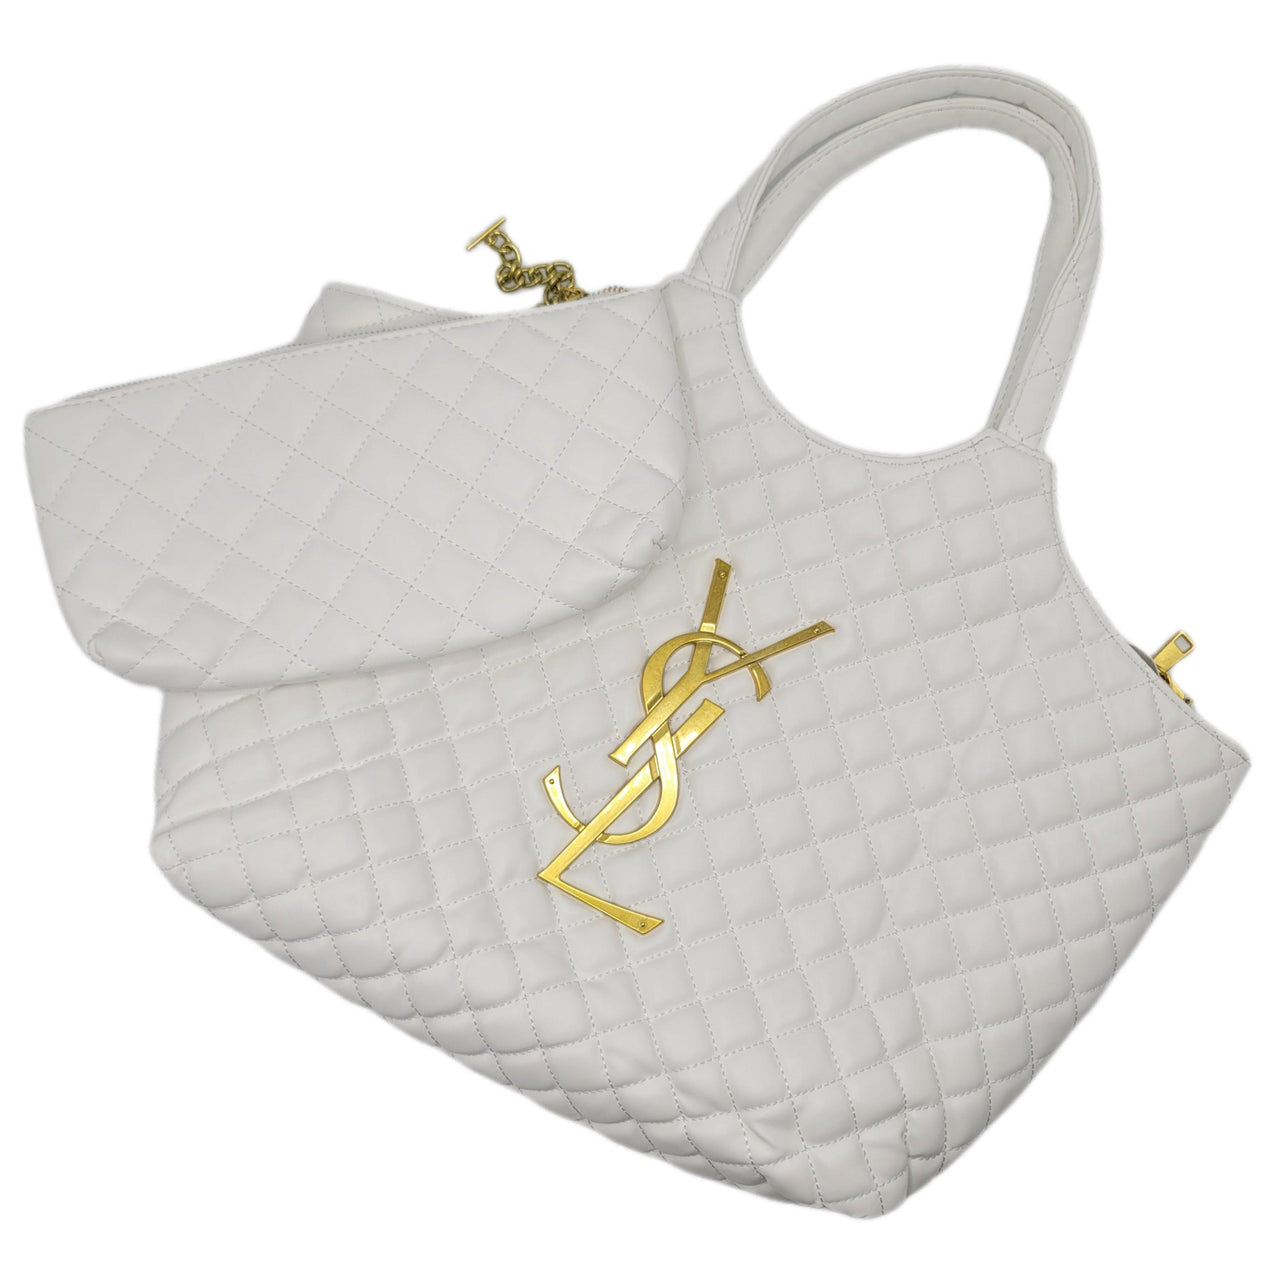 The Bag Couture Handbags, Wallets & Cases White YSL iCare Quilted Tote Bag Black/White/Beige